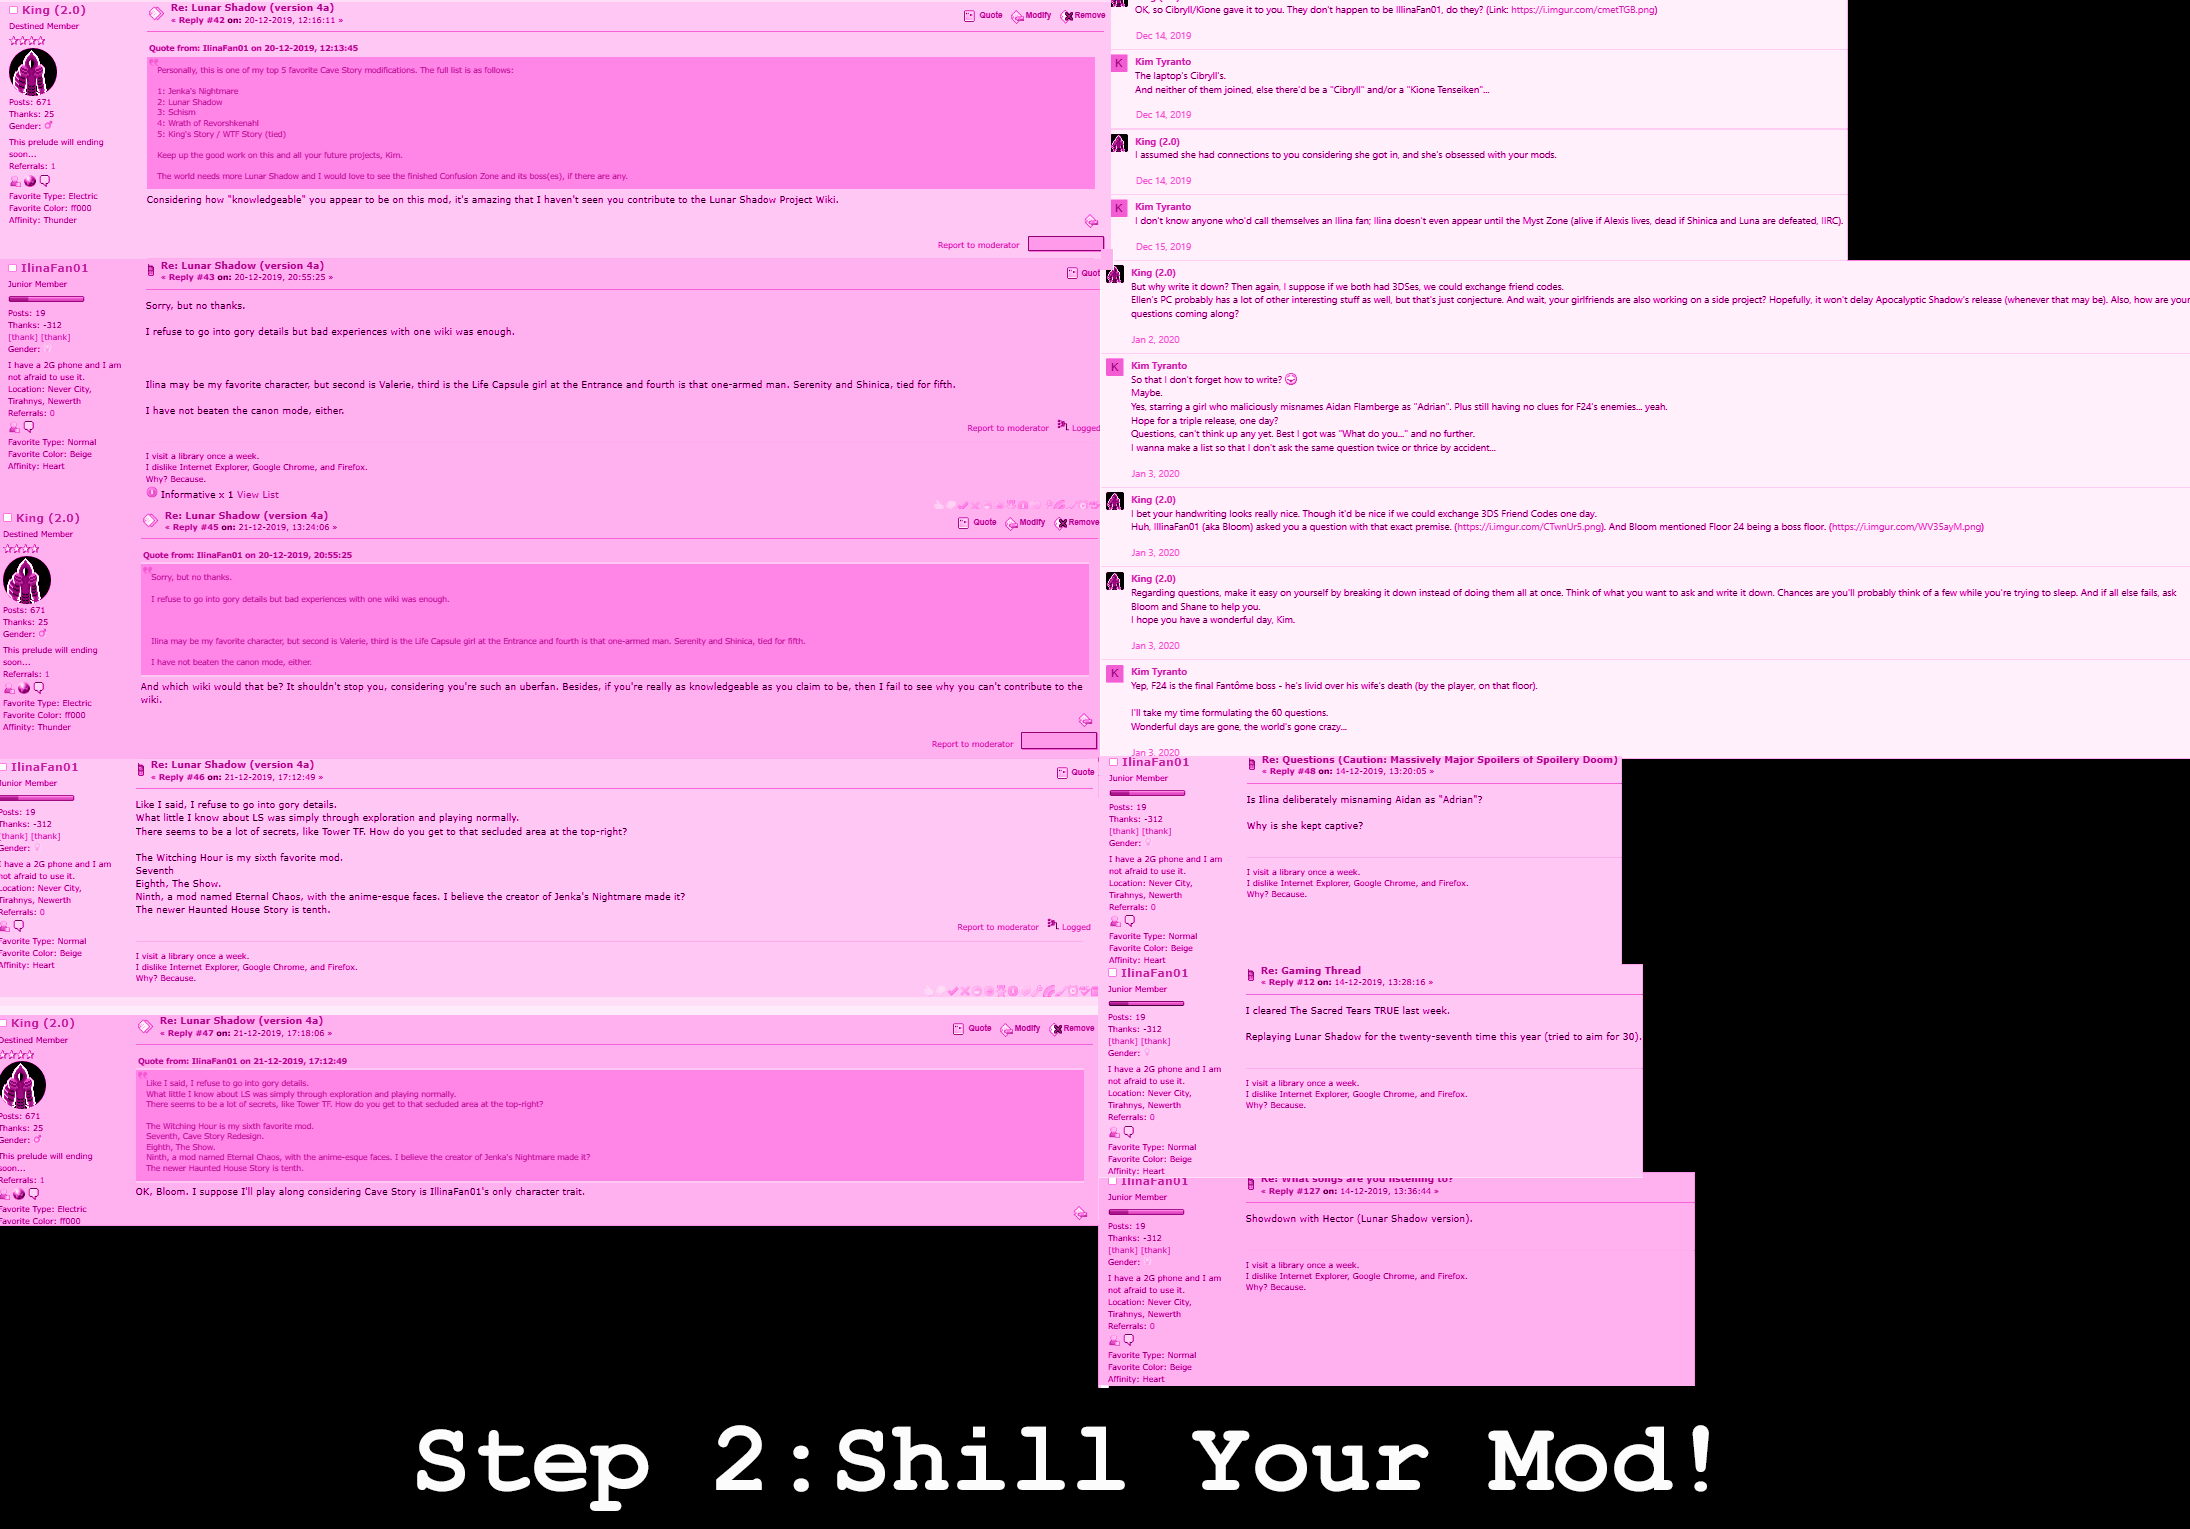 How 2 Shill Your Mod Page 3.png